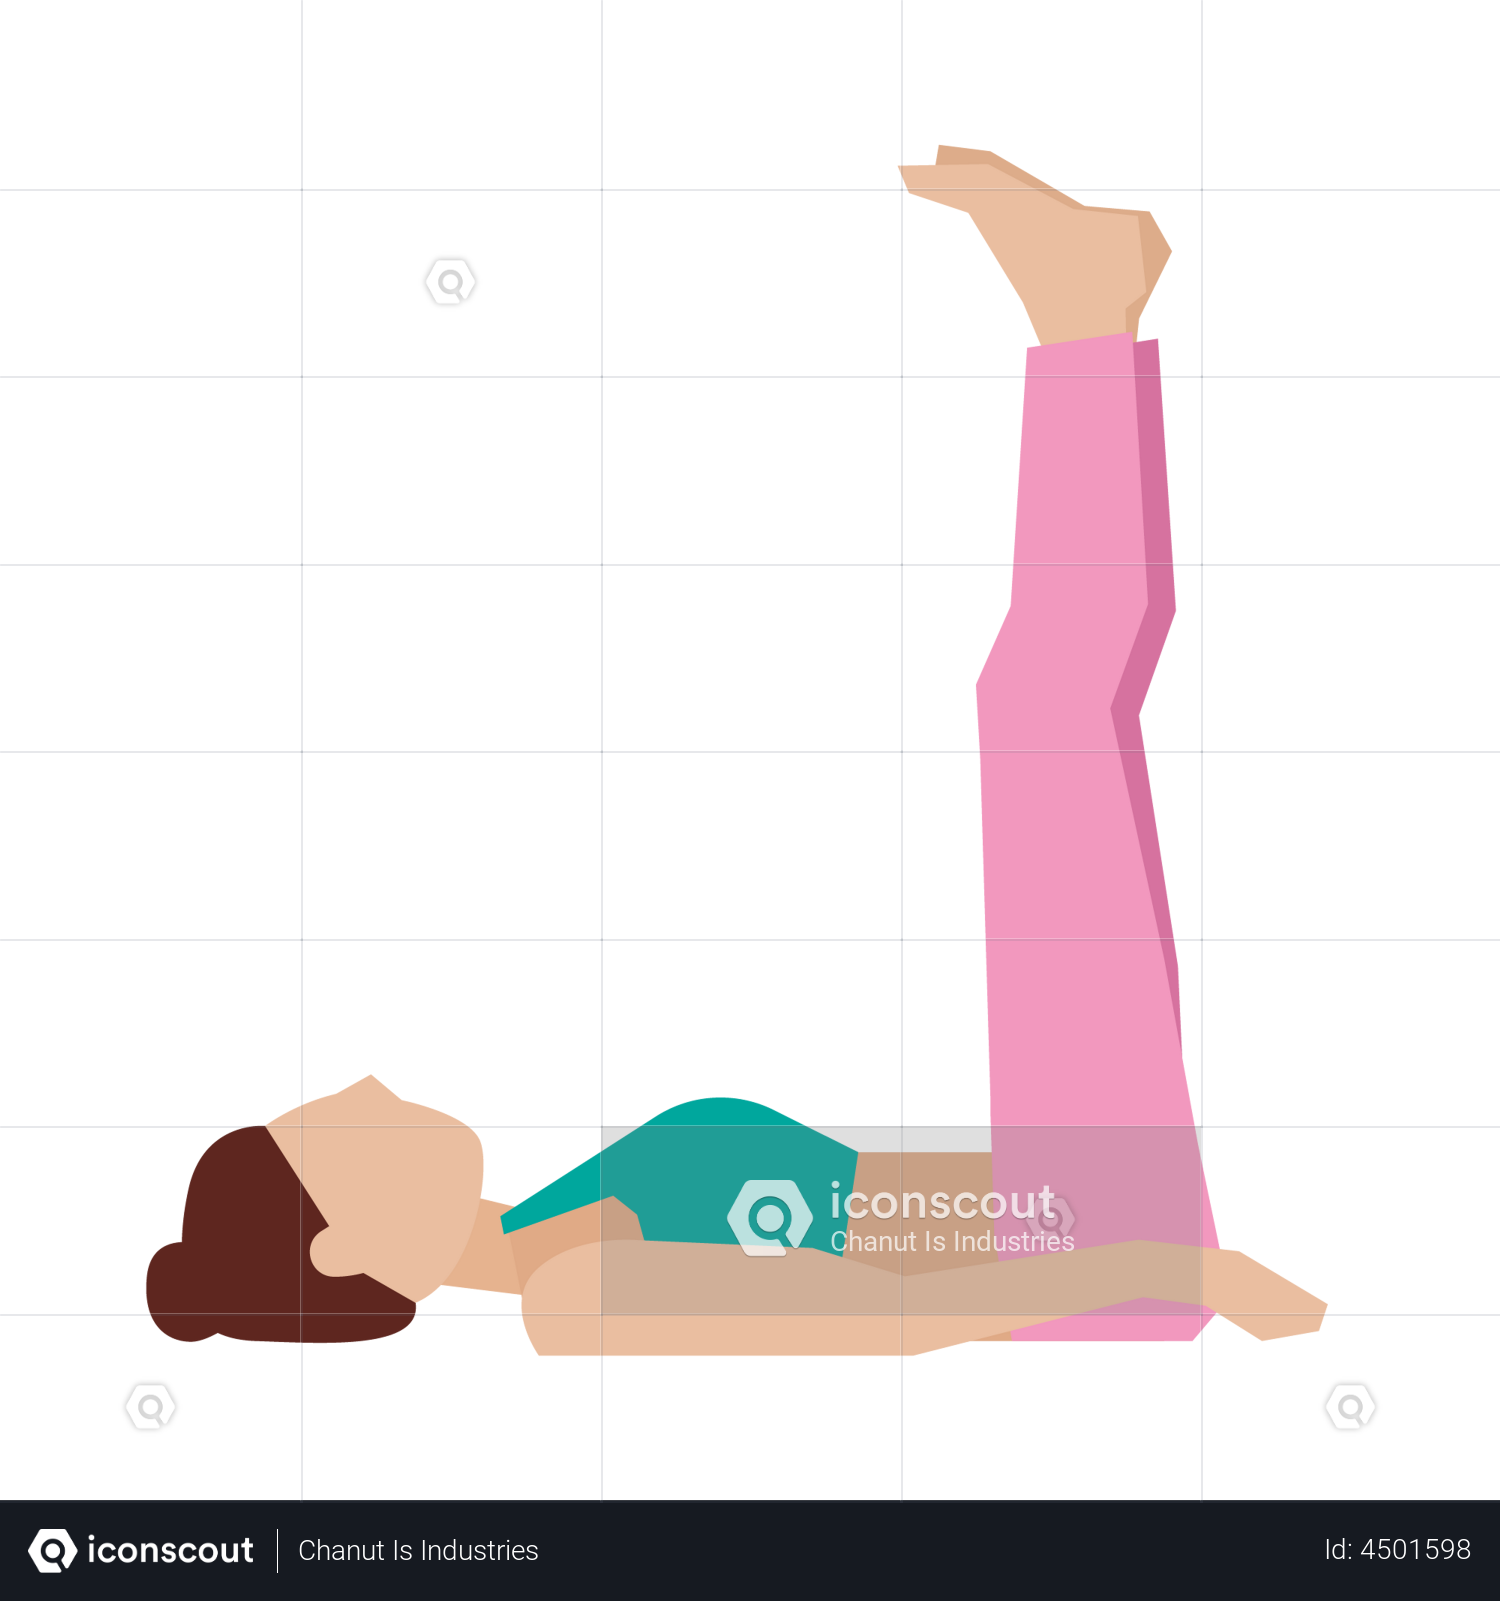 Viparita Karni, also known as Legs-Up-The-Wall pose, is a simple yet  powerful yoga posture that has numerous benefits for the body and mind. By  practicing this pose regularly, you can experience: 1